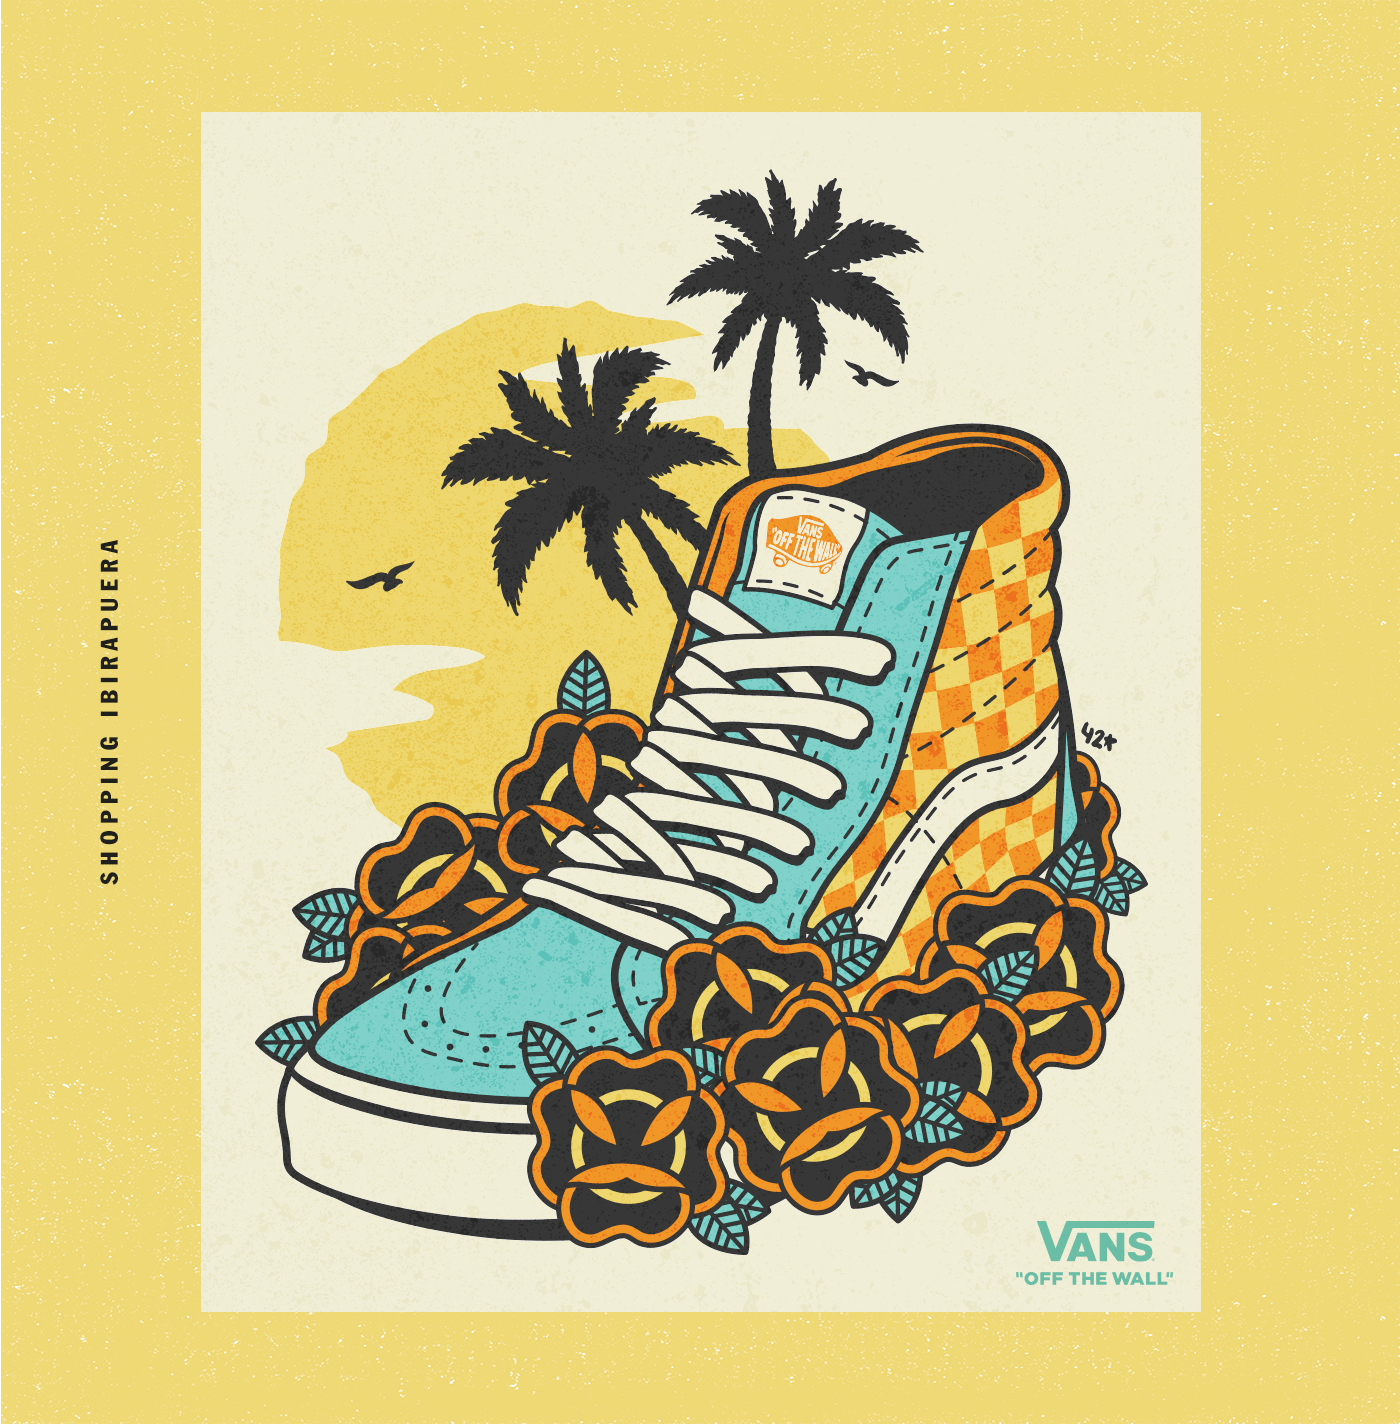 VANS - OFF THE WALL on Behance